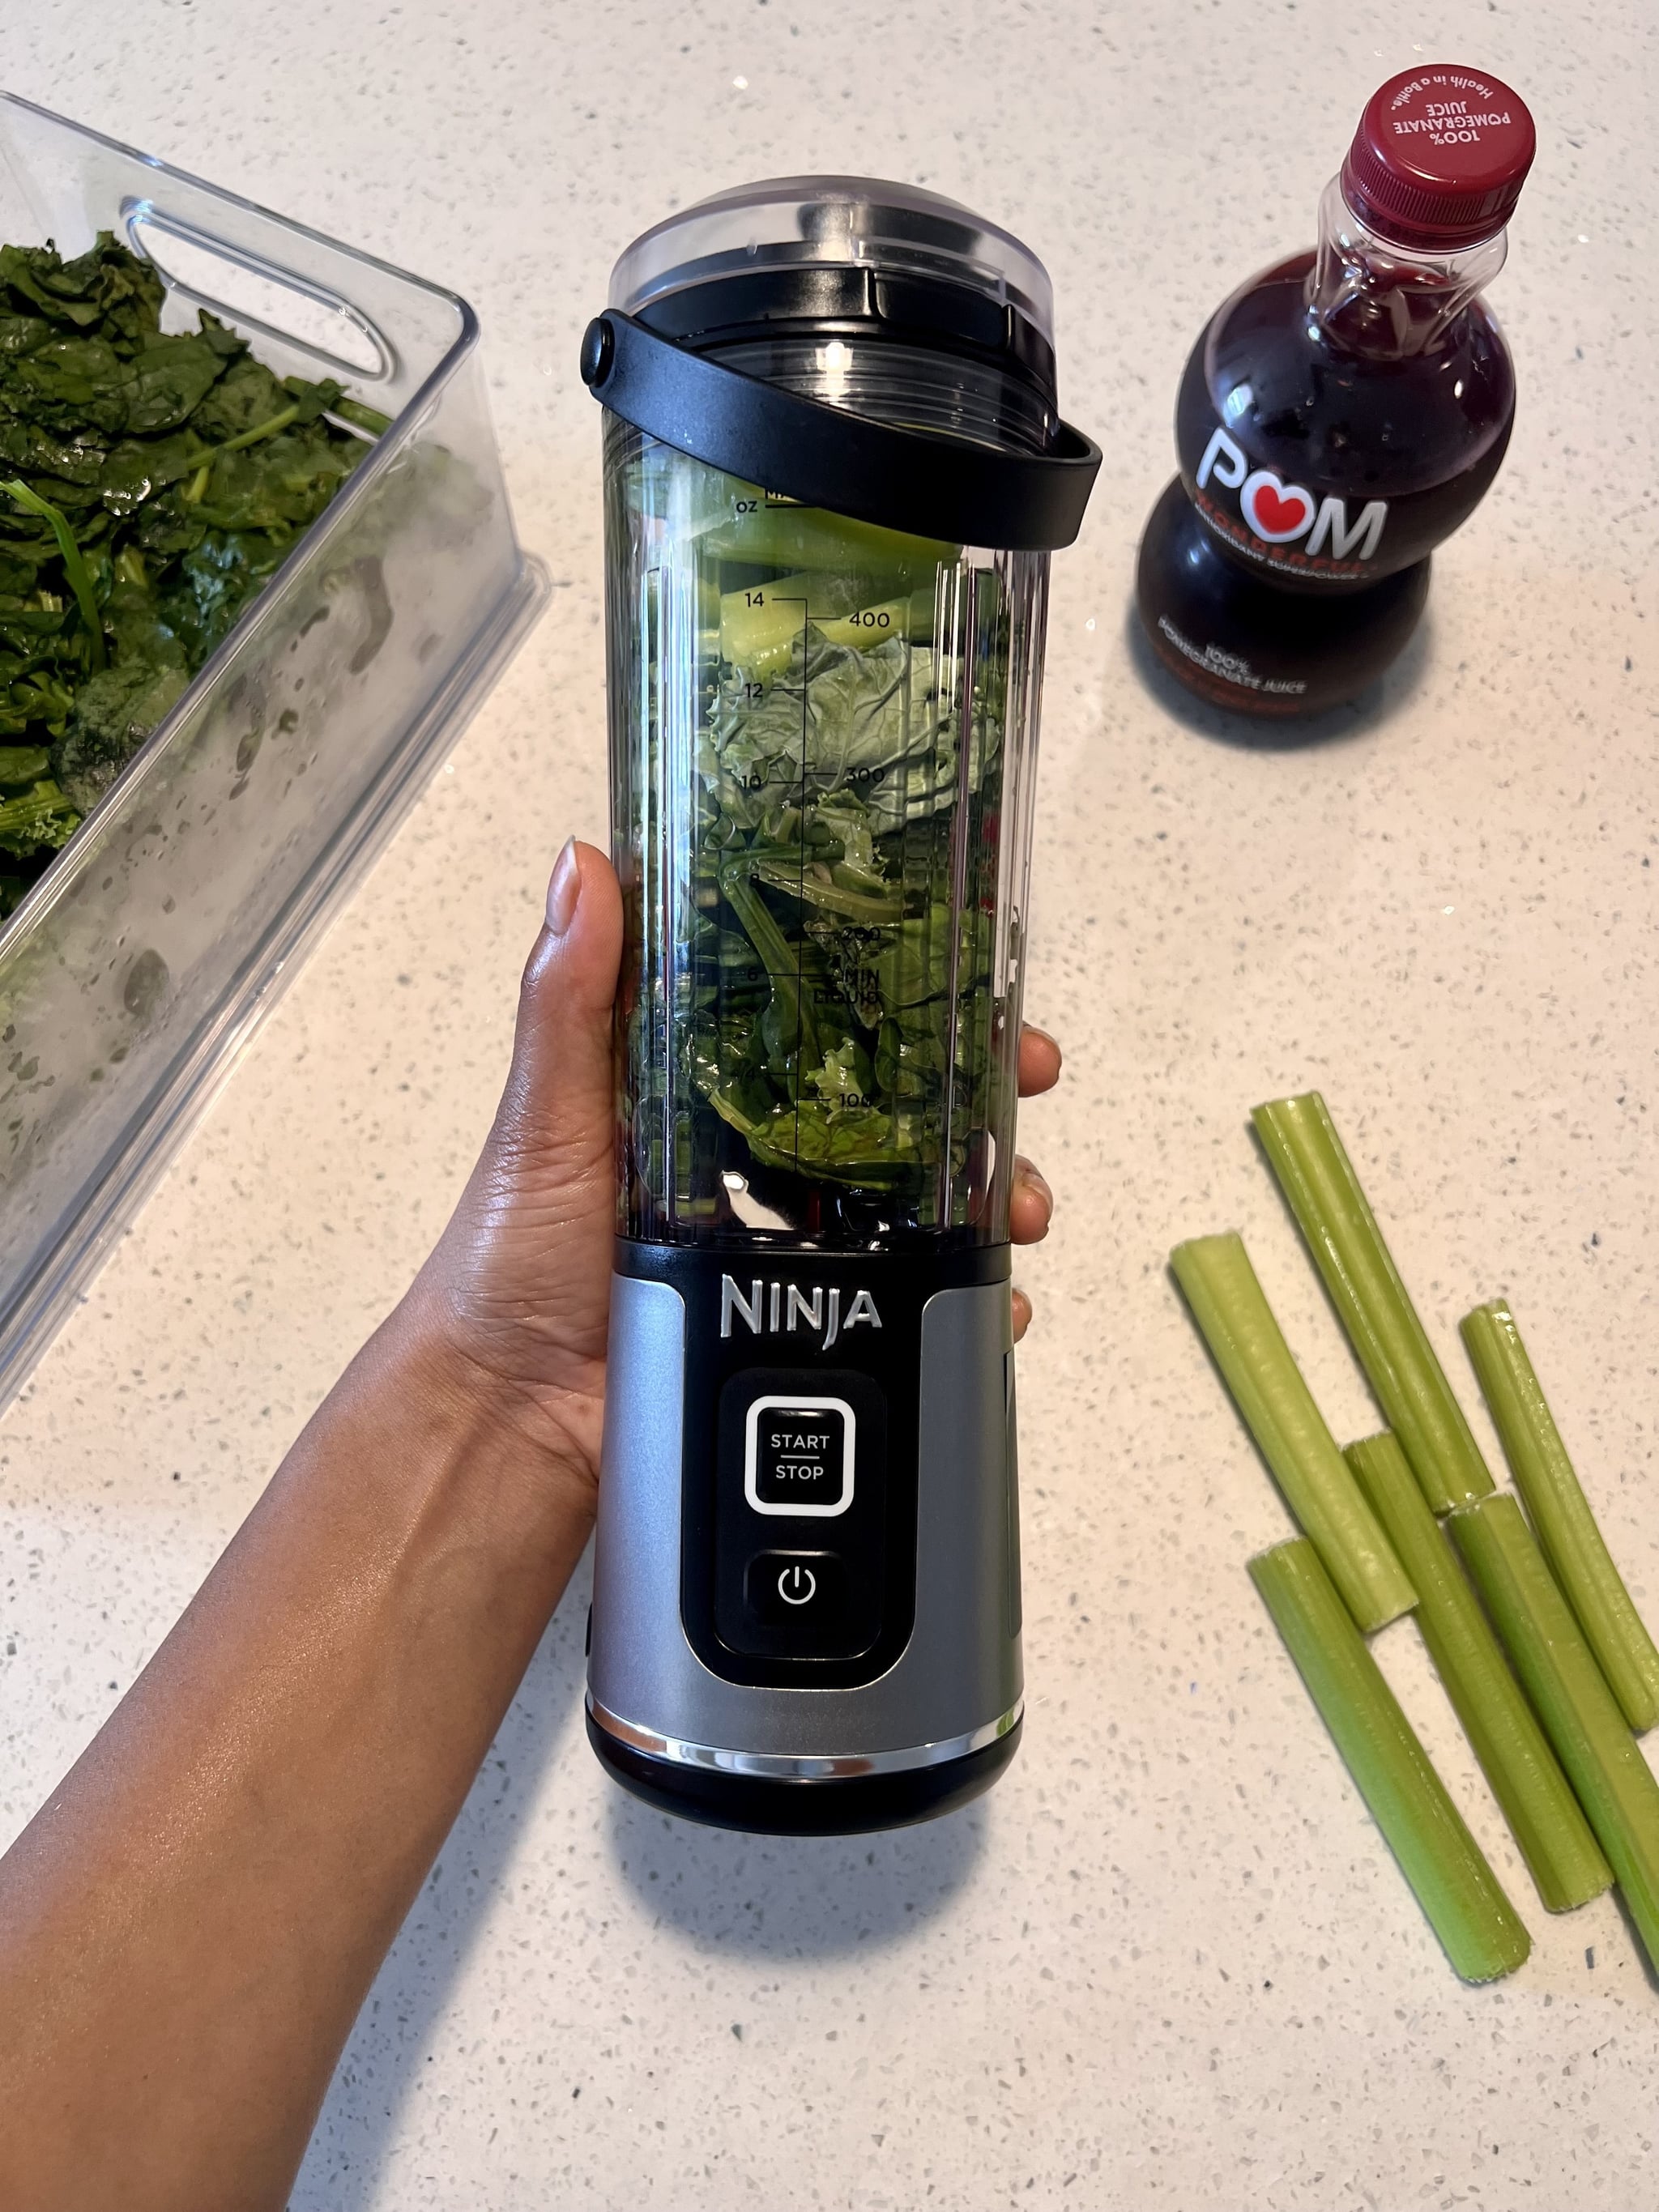 The Ninja Blast Portable Blender with leafy greens, celery, and ice inside.